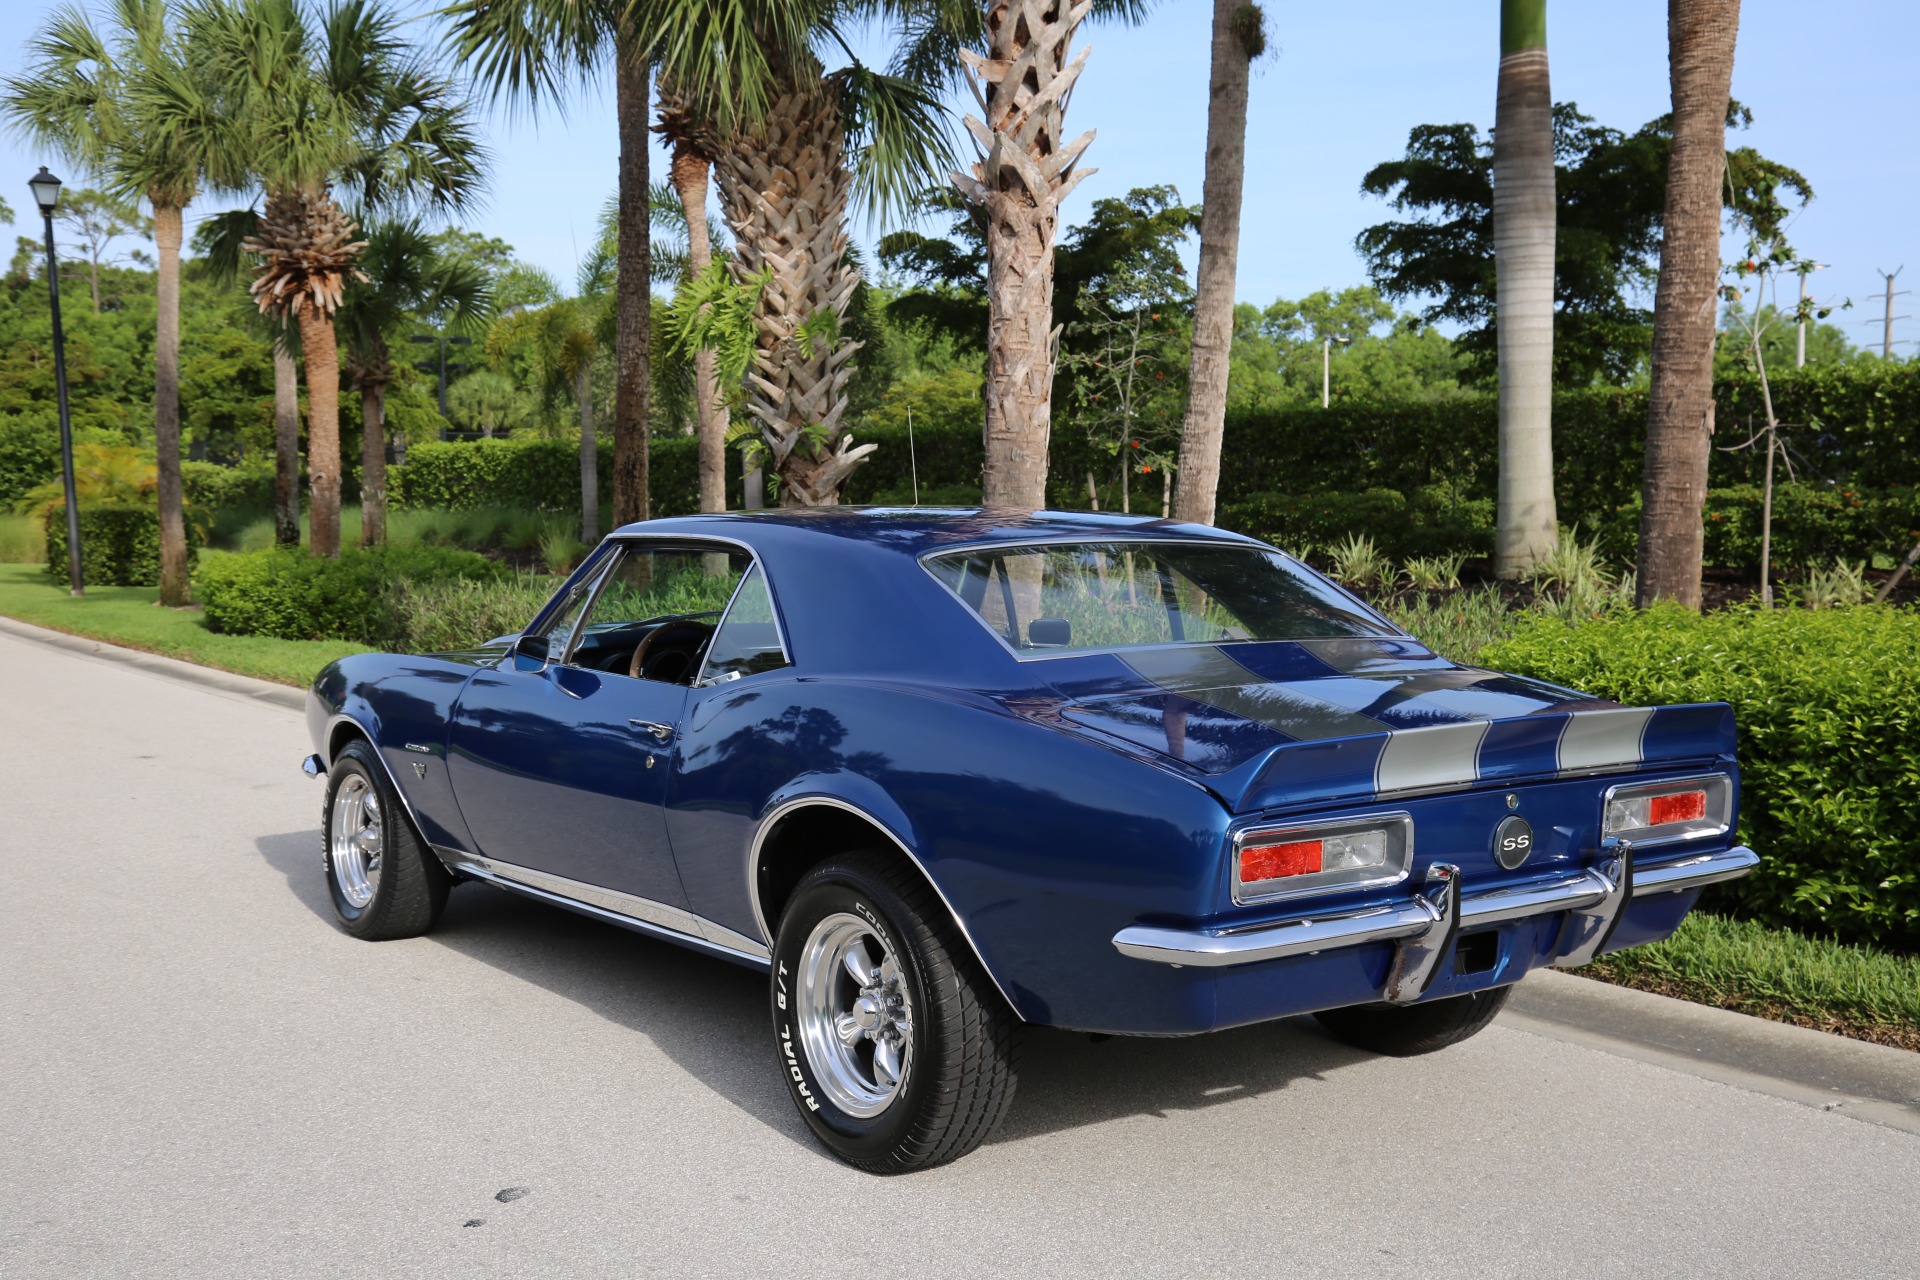 Used 1967 Chevrolet Camaro V8 Auto for sale Sold at Muscle Cars for Sale Inc. in Fort Myers FL 33912 5